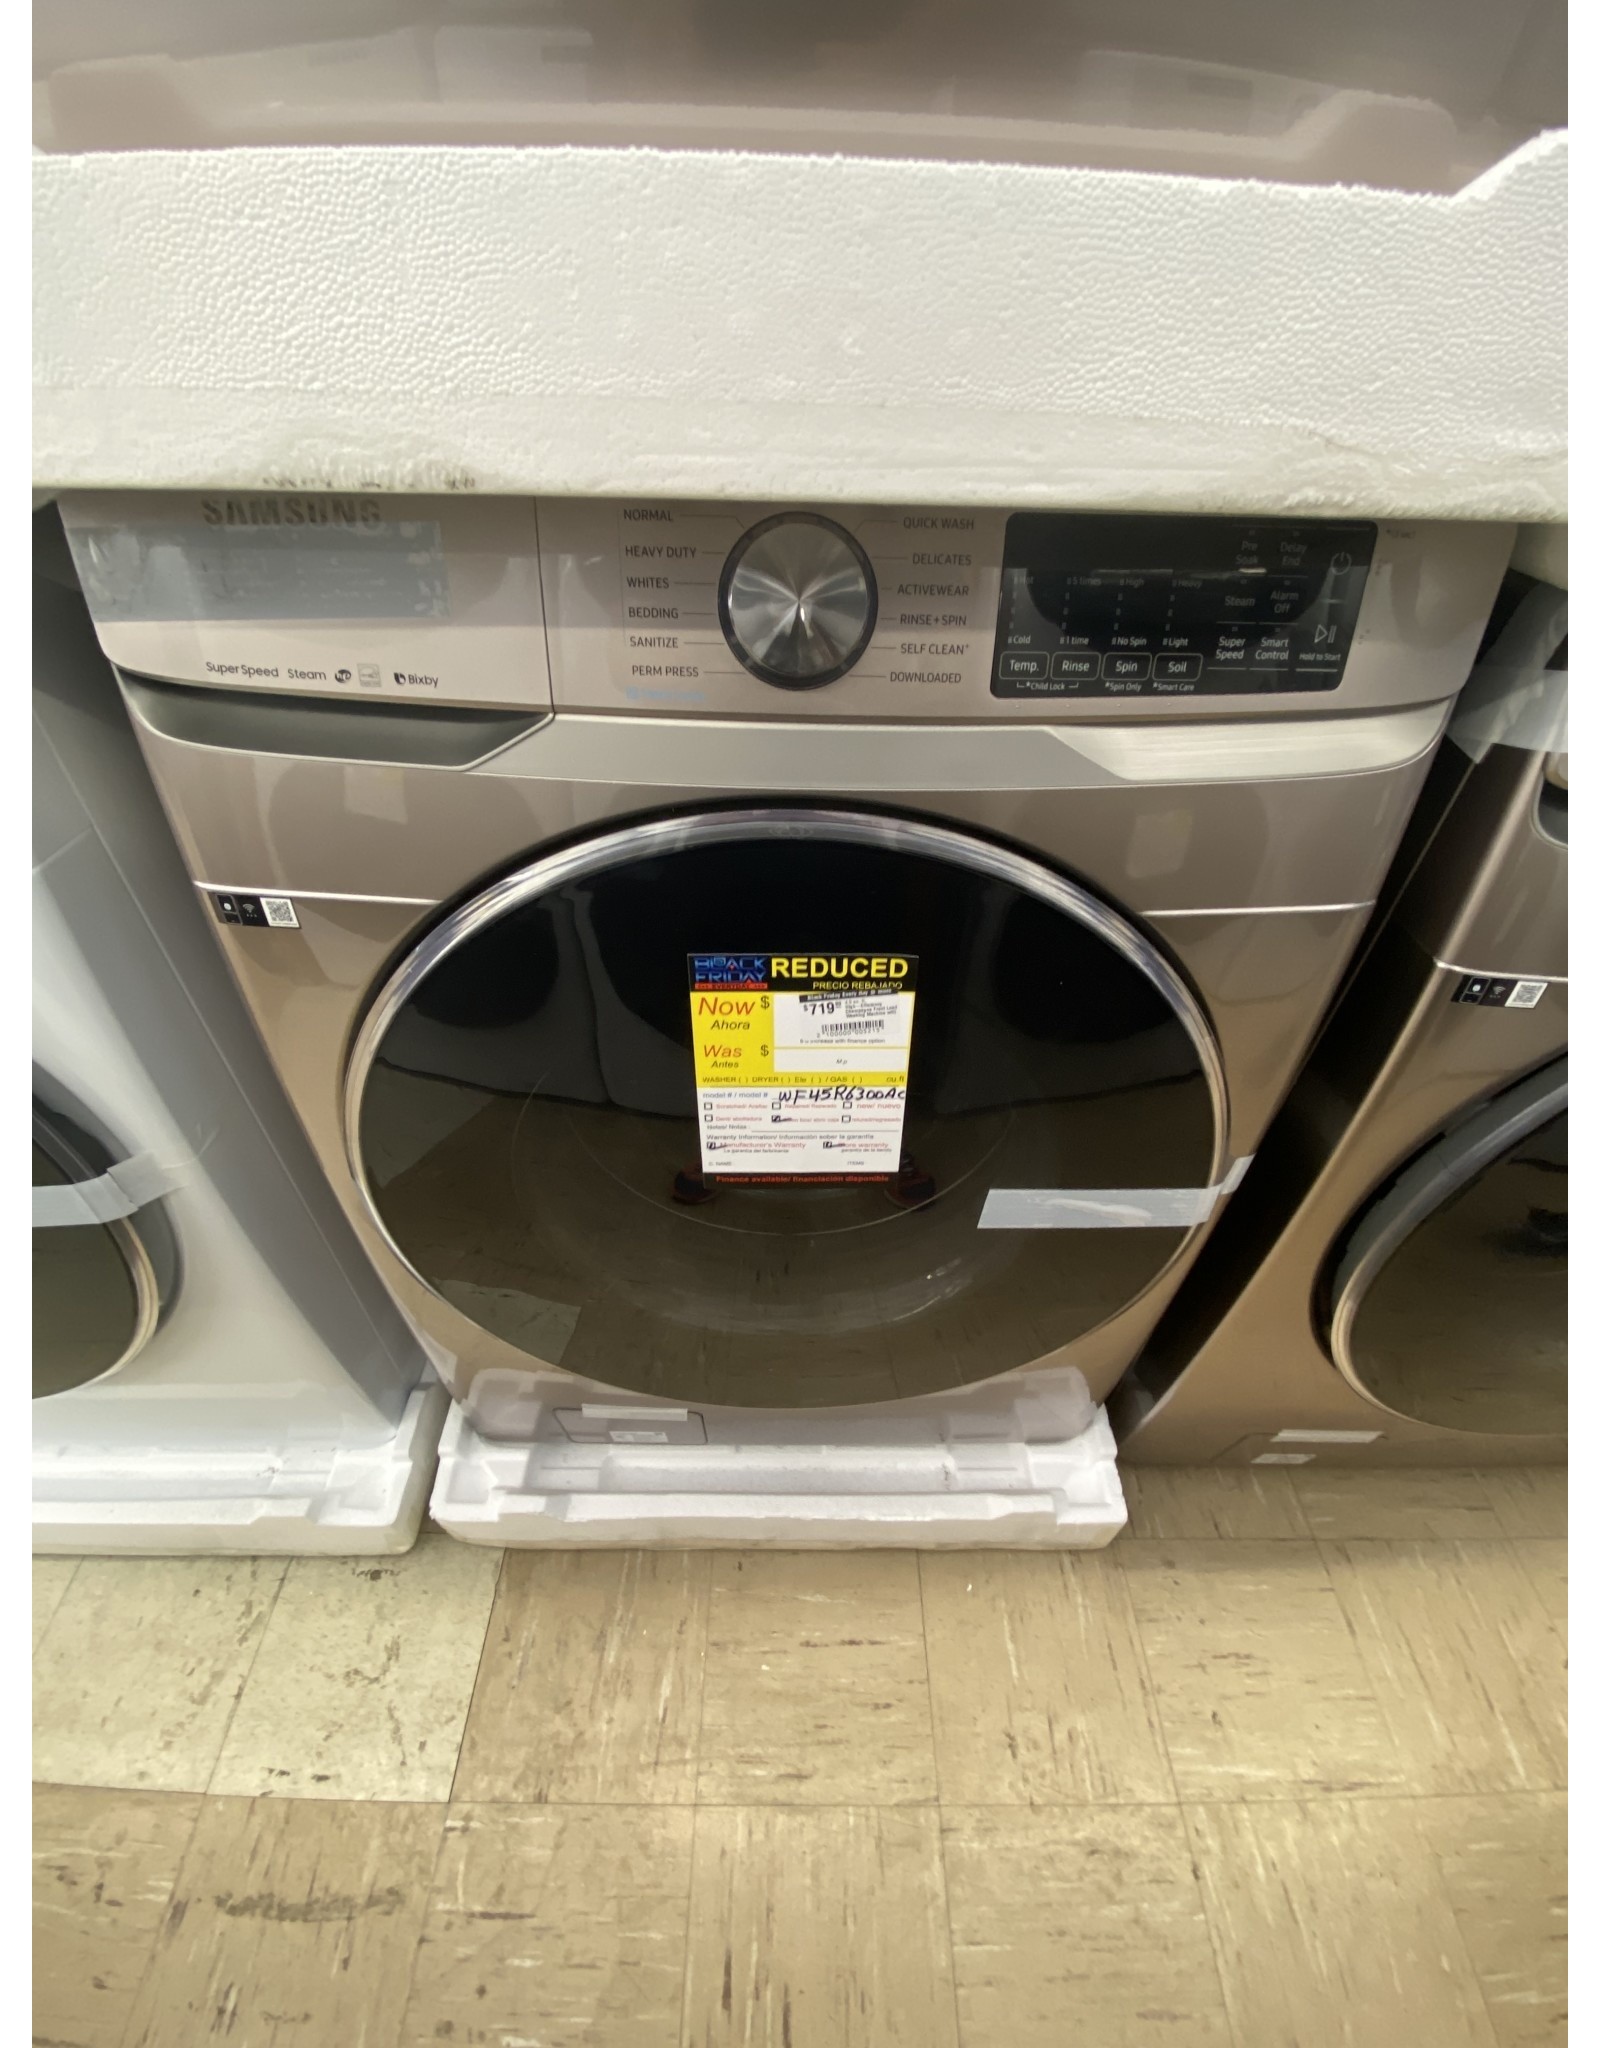 SAMSUNG 4.5 cu. ft. High-Efficiency Champagne Front Load Washing Machine with Steam and Super Speed